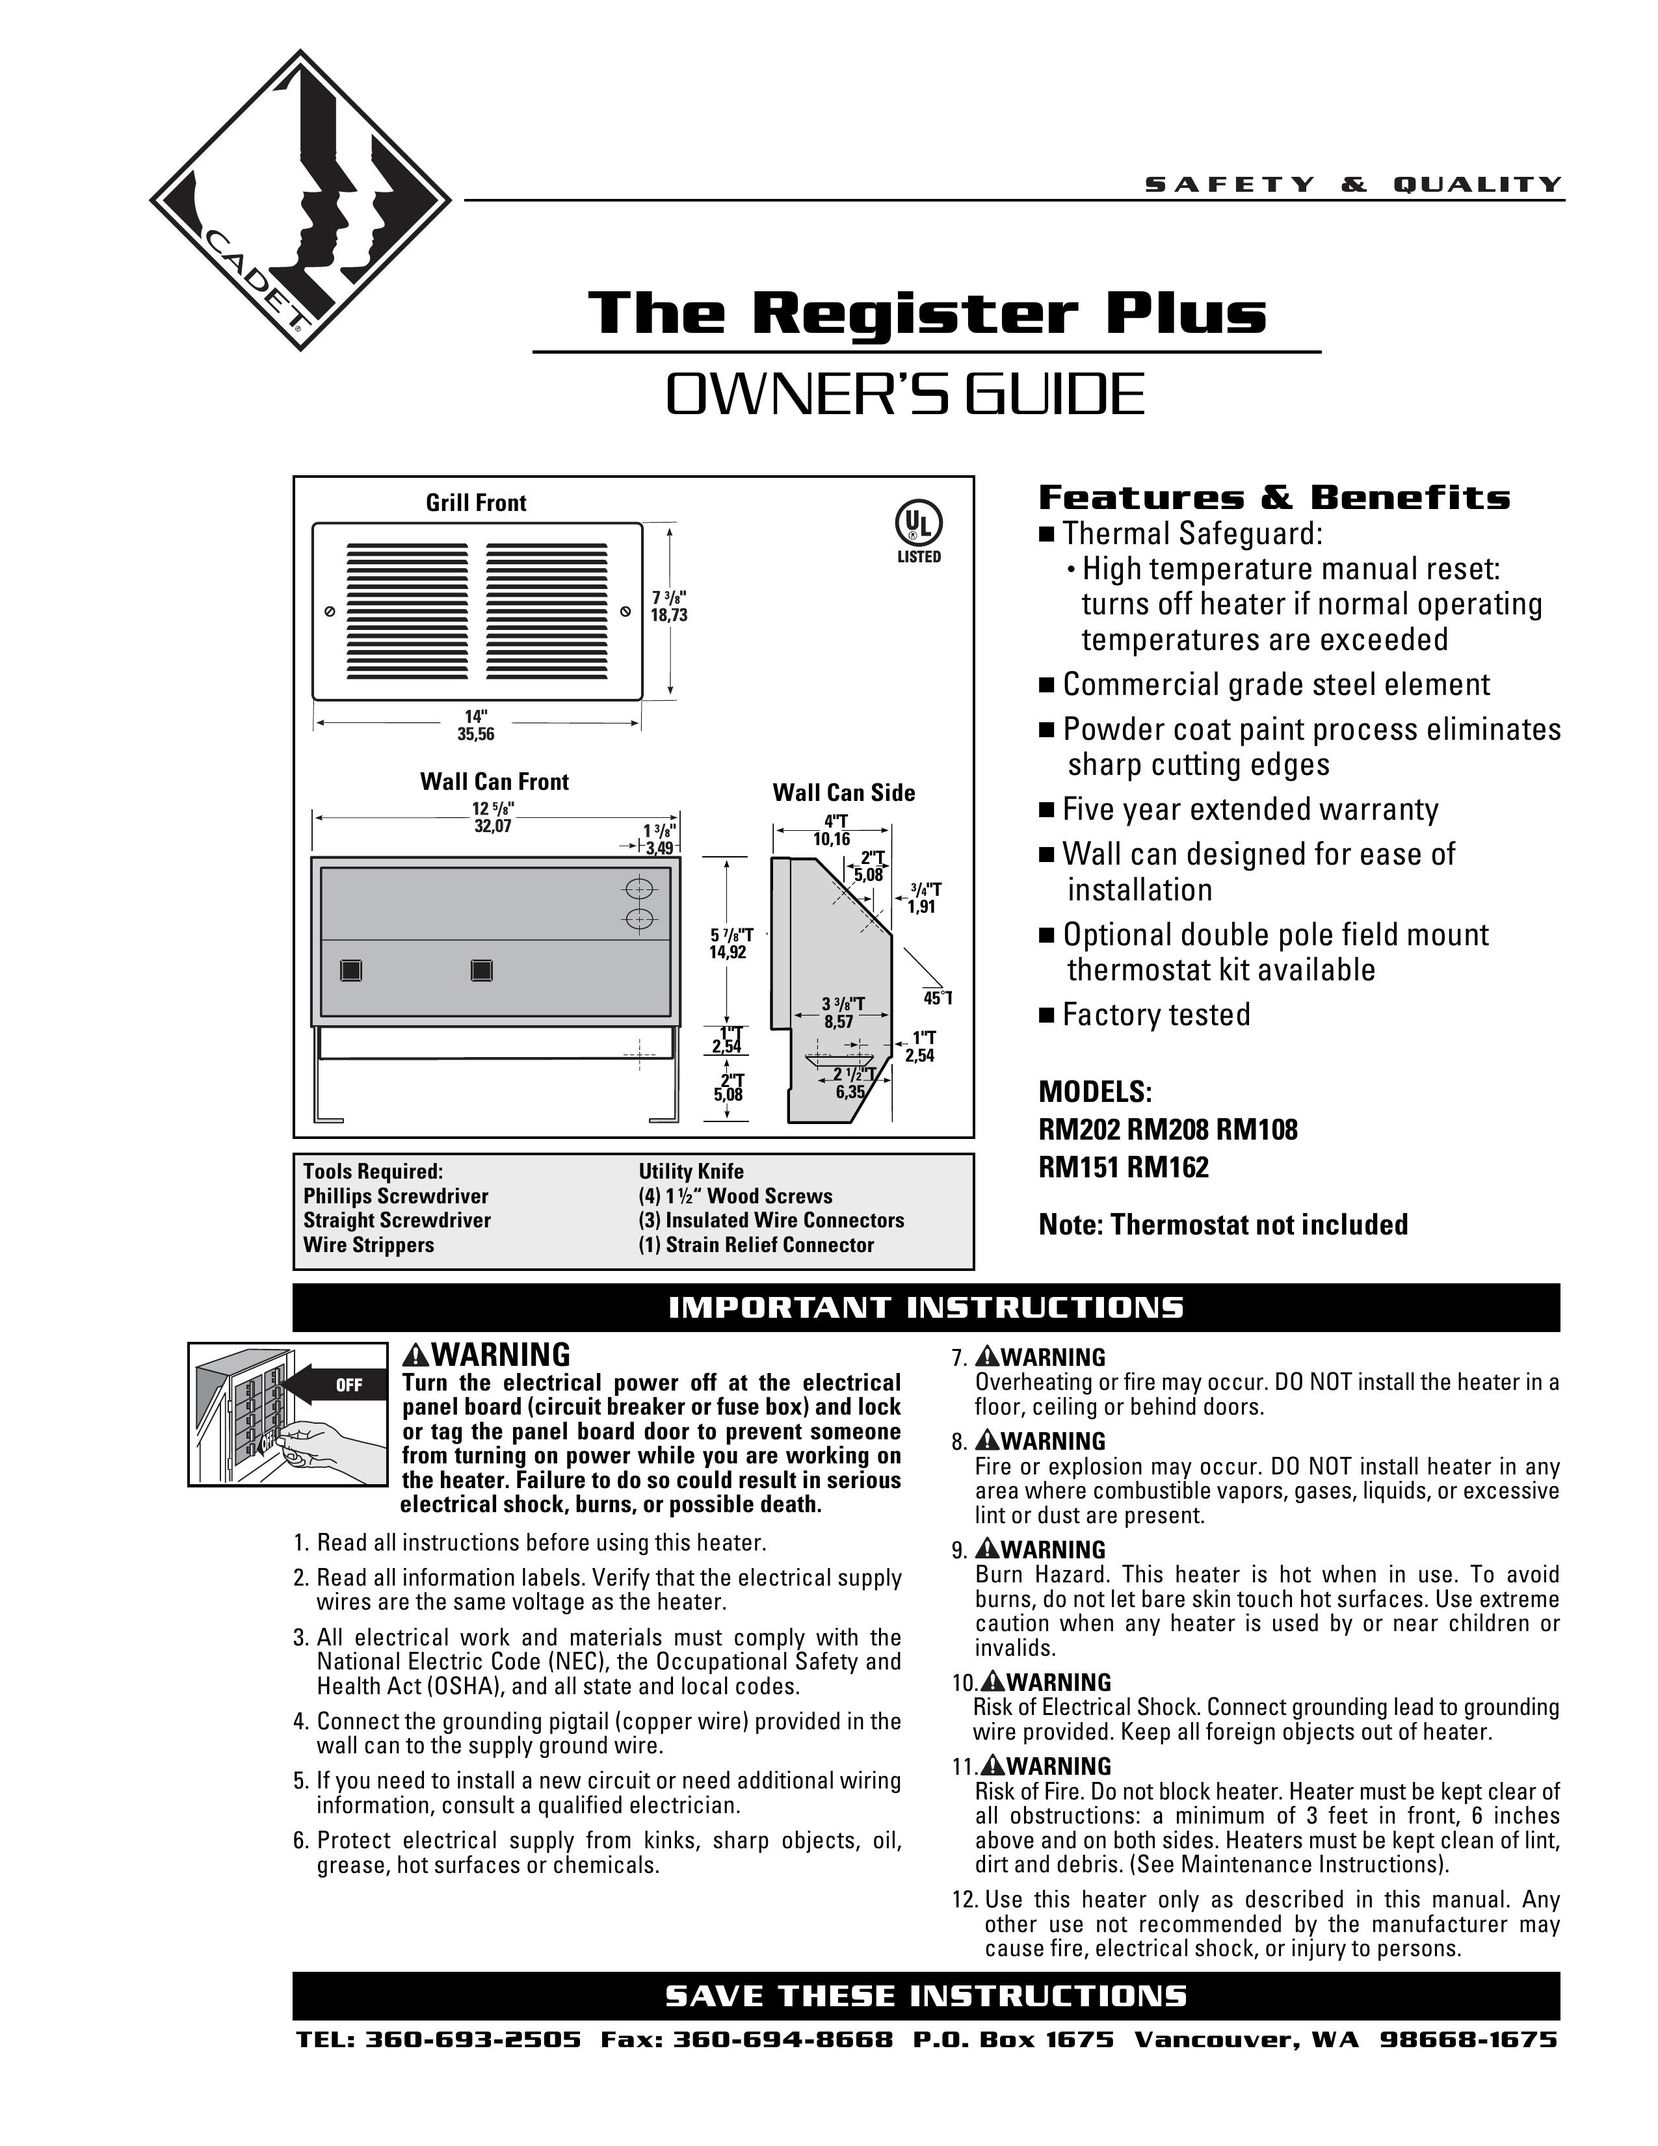 Cadet RM208 Electric Heater User Manual